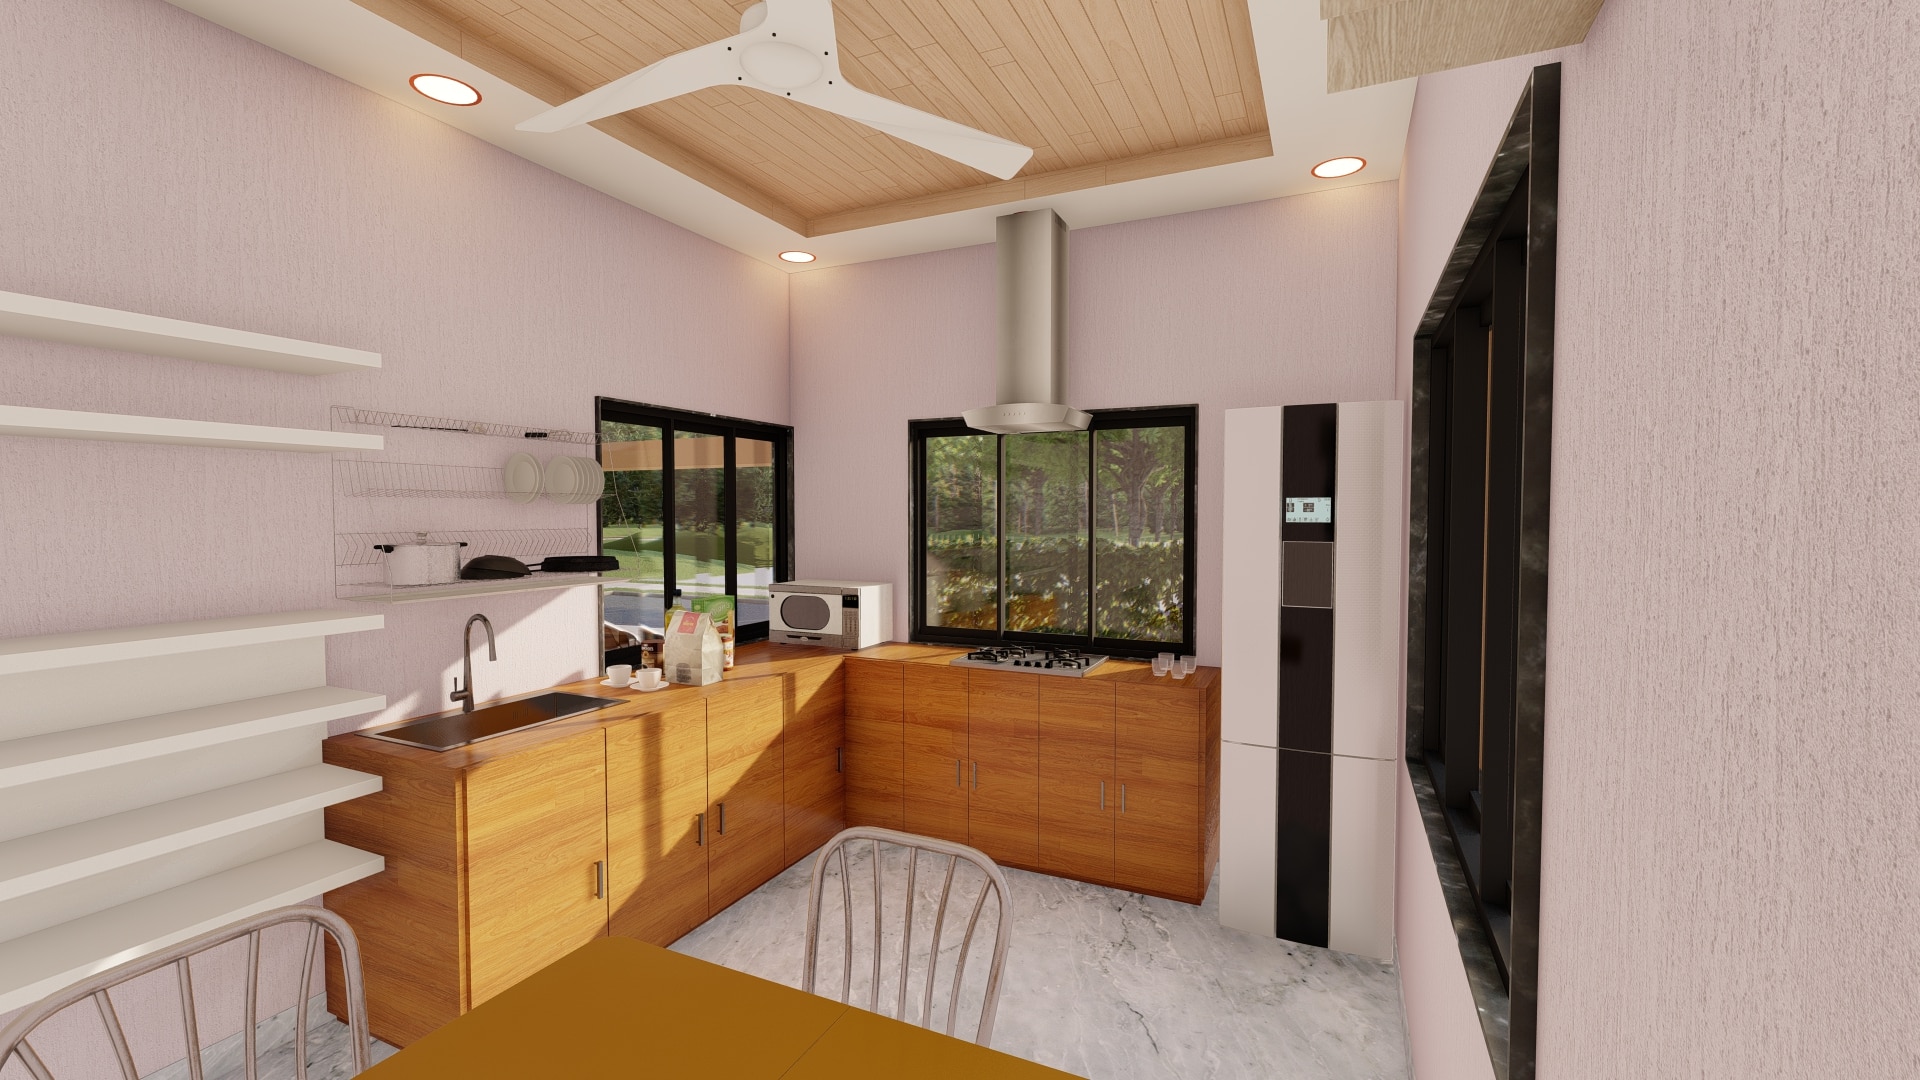 with dining area large kitchen luxury bungalow home design by urban terrace east facing 30x50 sq ft